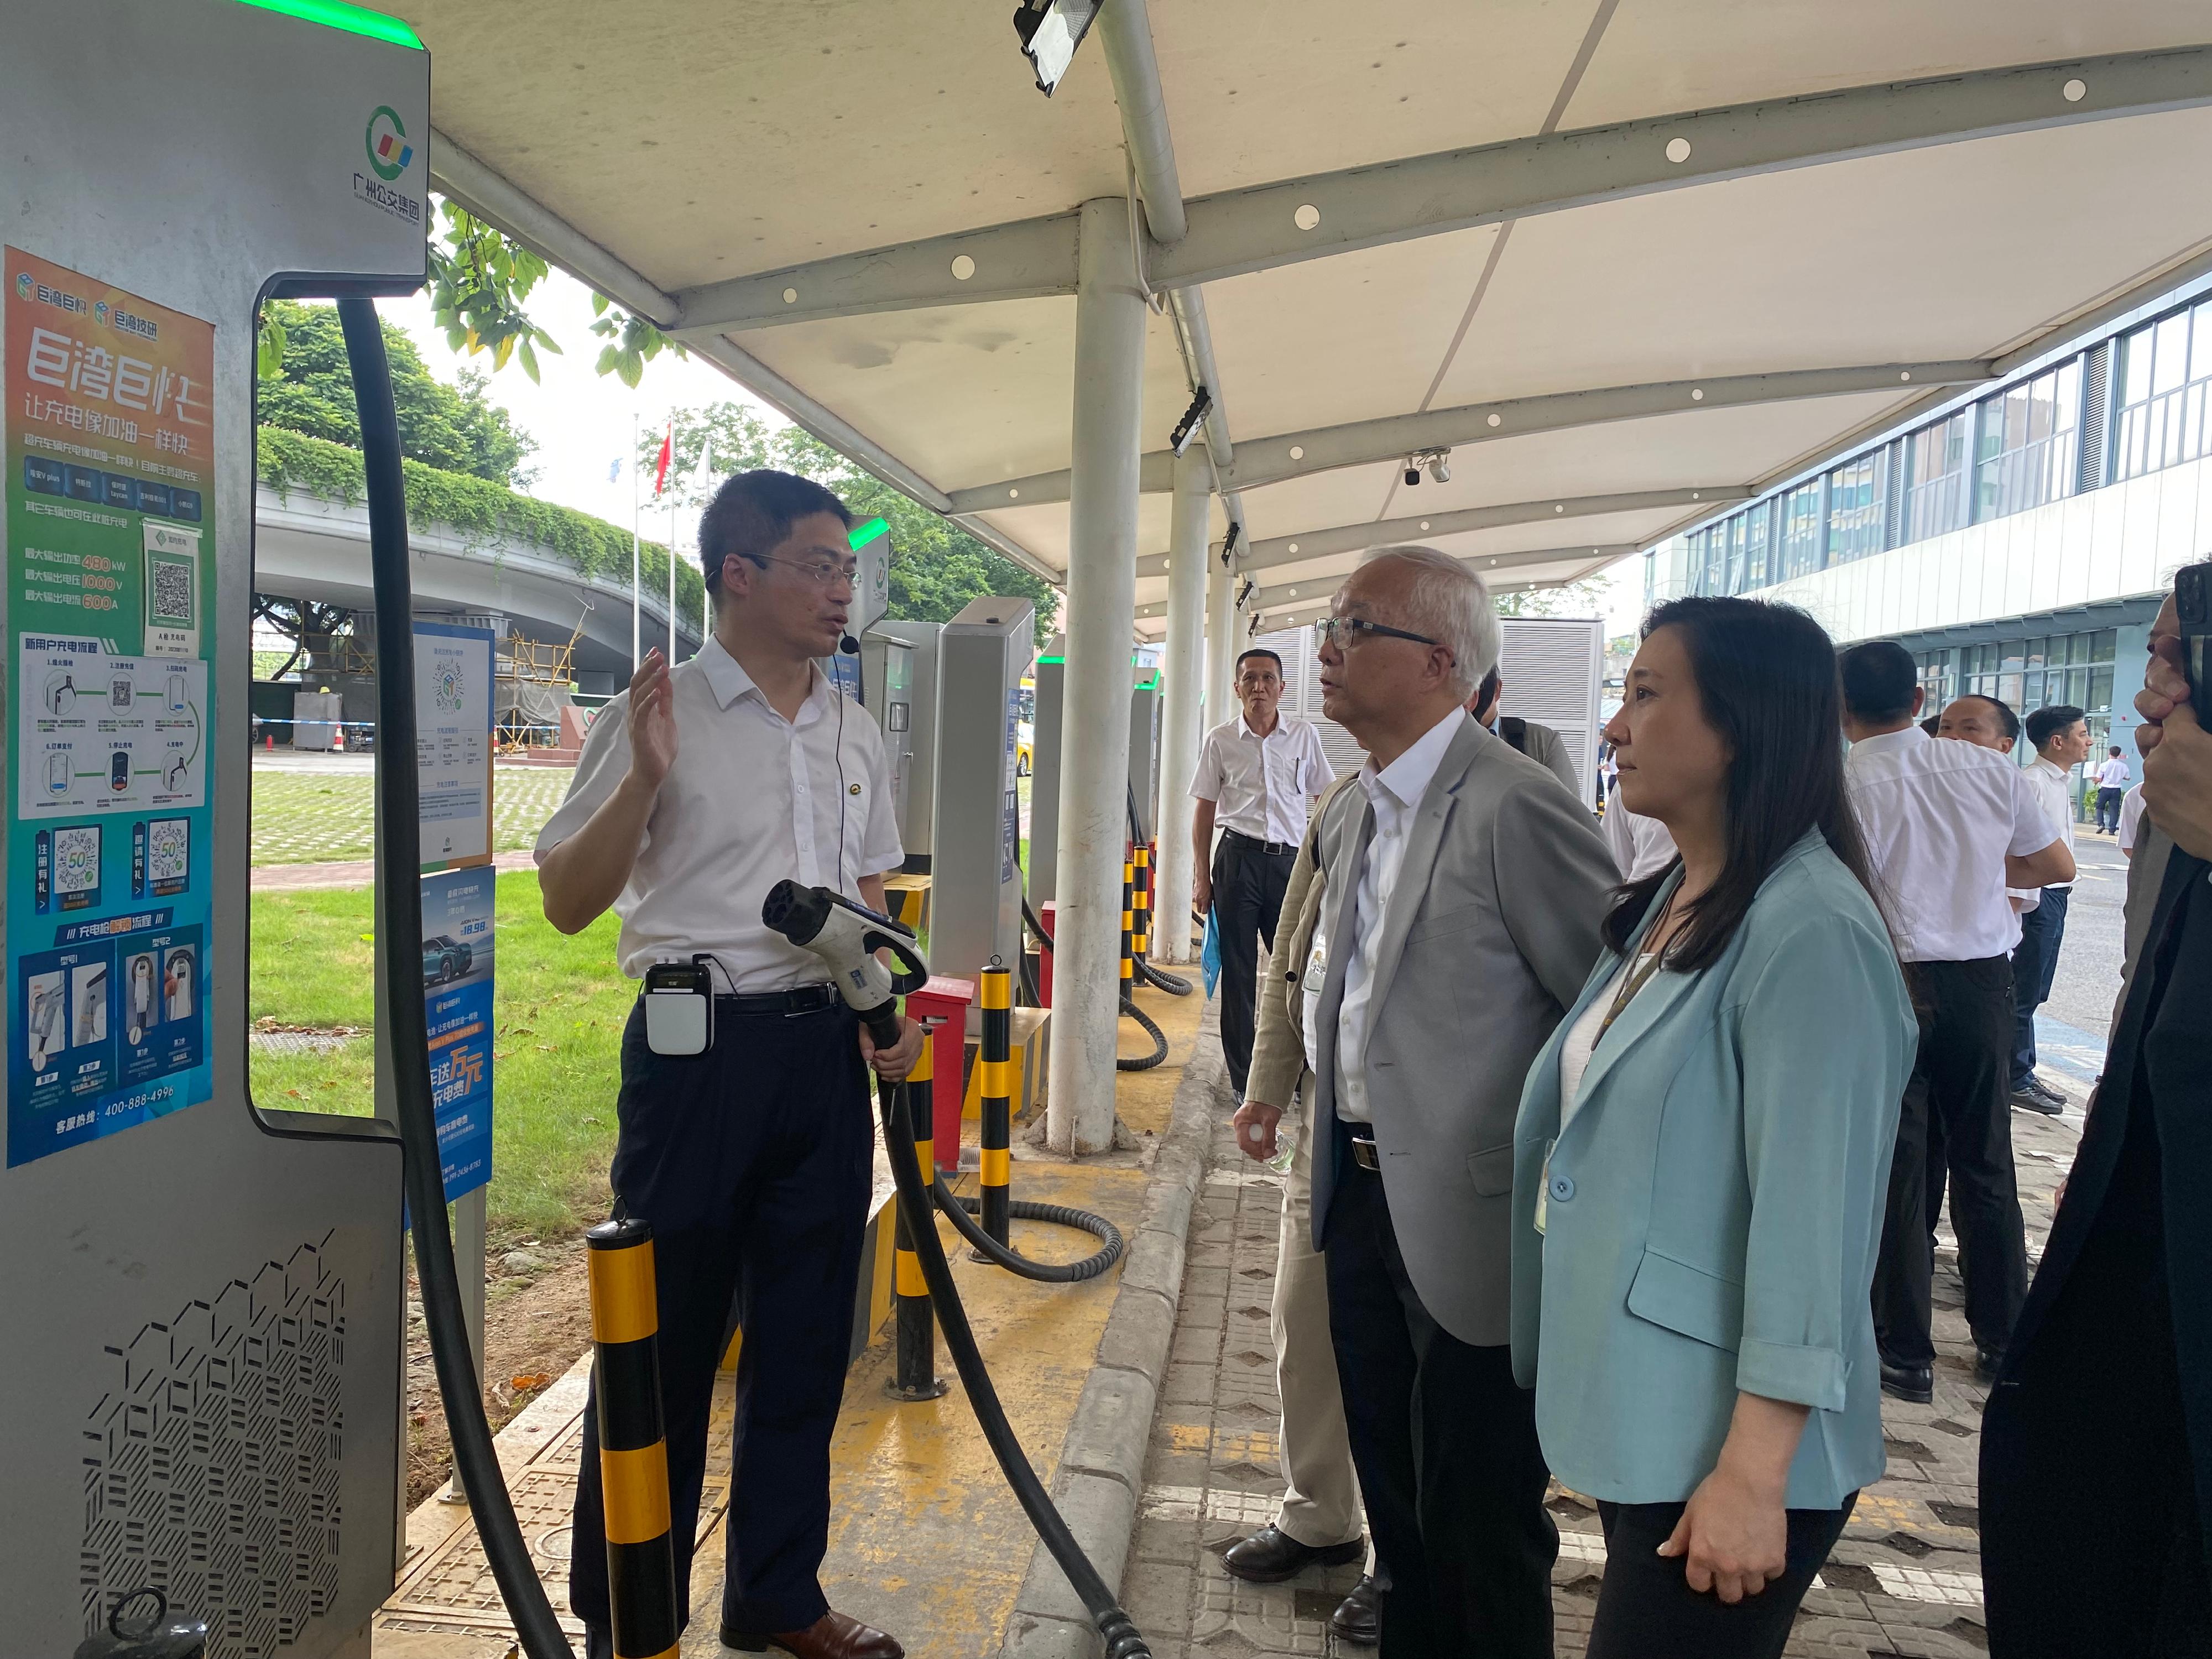 The Secretary for Environment and Ecology, Mr Tse Chin-wan, together with the Legislative Council Panel on Environmental Affairs, visited the Yanling new energy eco-industrial park and Guangzhou public transport command center of the Guangzhou Public Transport Group this afternoon (August 7). Photo shows Mr Tse (second right),  the Chairman of the Legislative Council Panel on Environmental Affairs, Ms Elizabeth Quat (first right), and the delegation of the Legislative Council Panel on Environmental Affairs, receiving a briefing from a representative on their charging facilities.